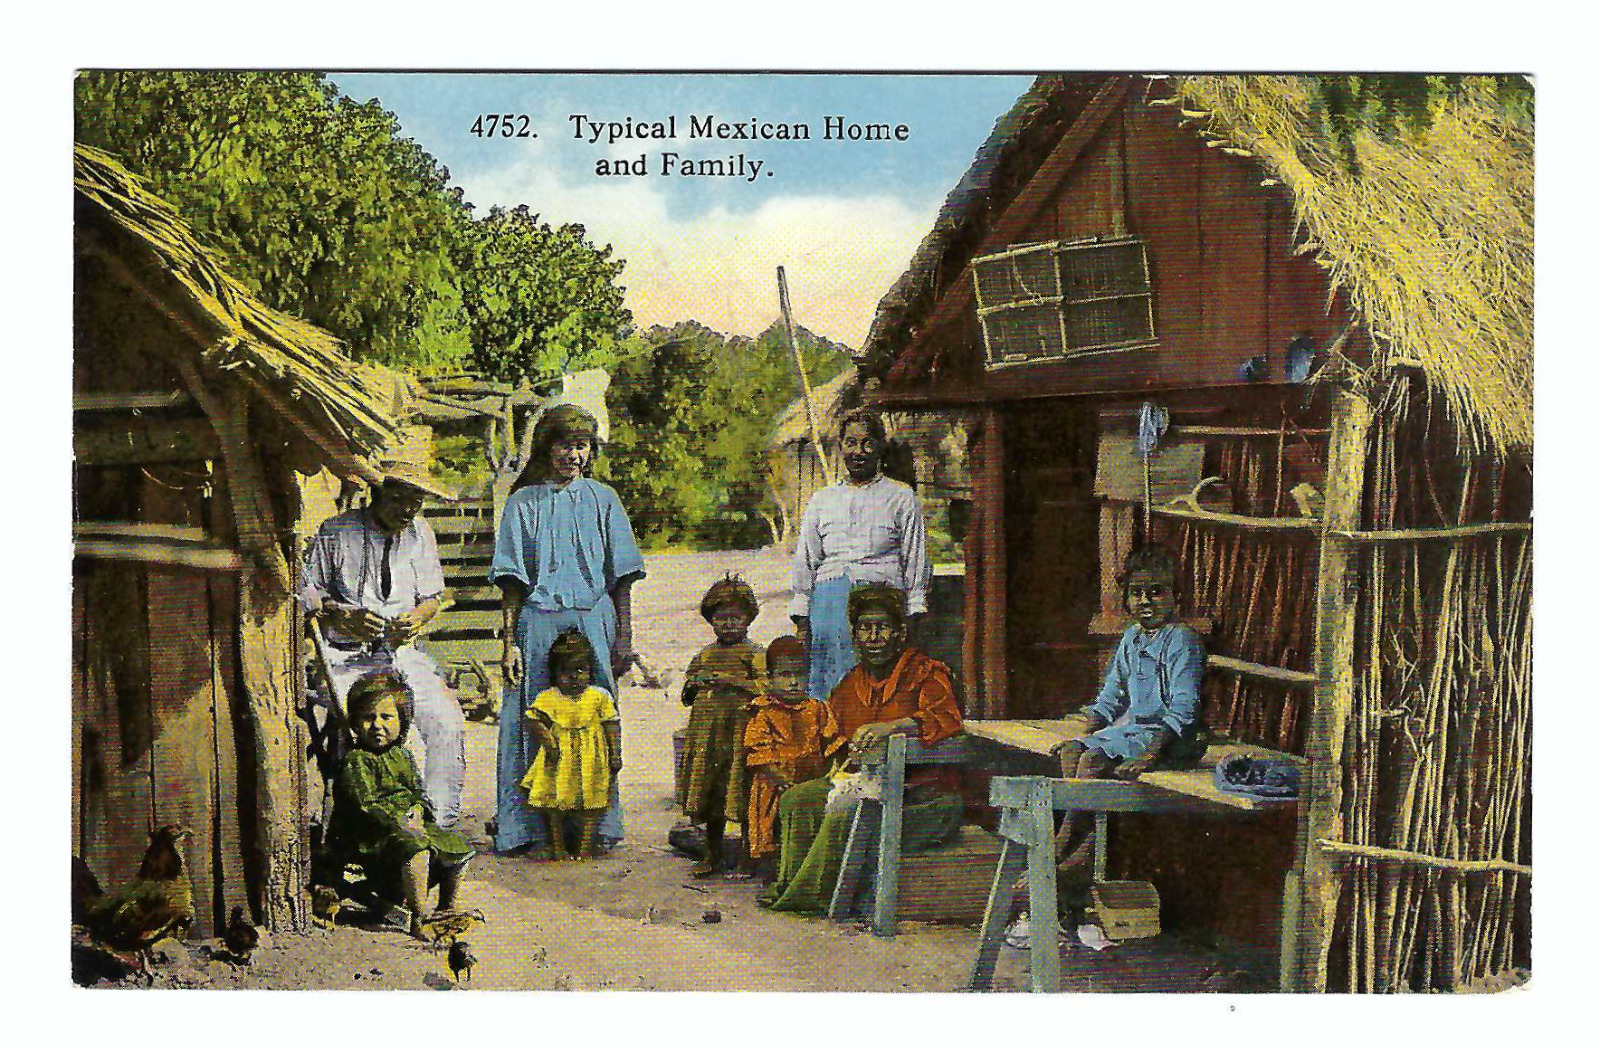 Typical Mexican Home in Mexico Vintage Postcard